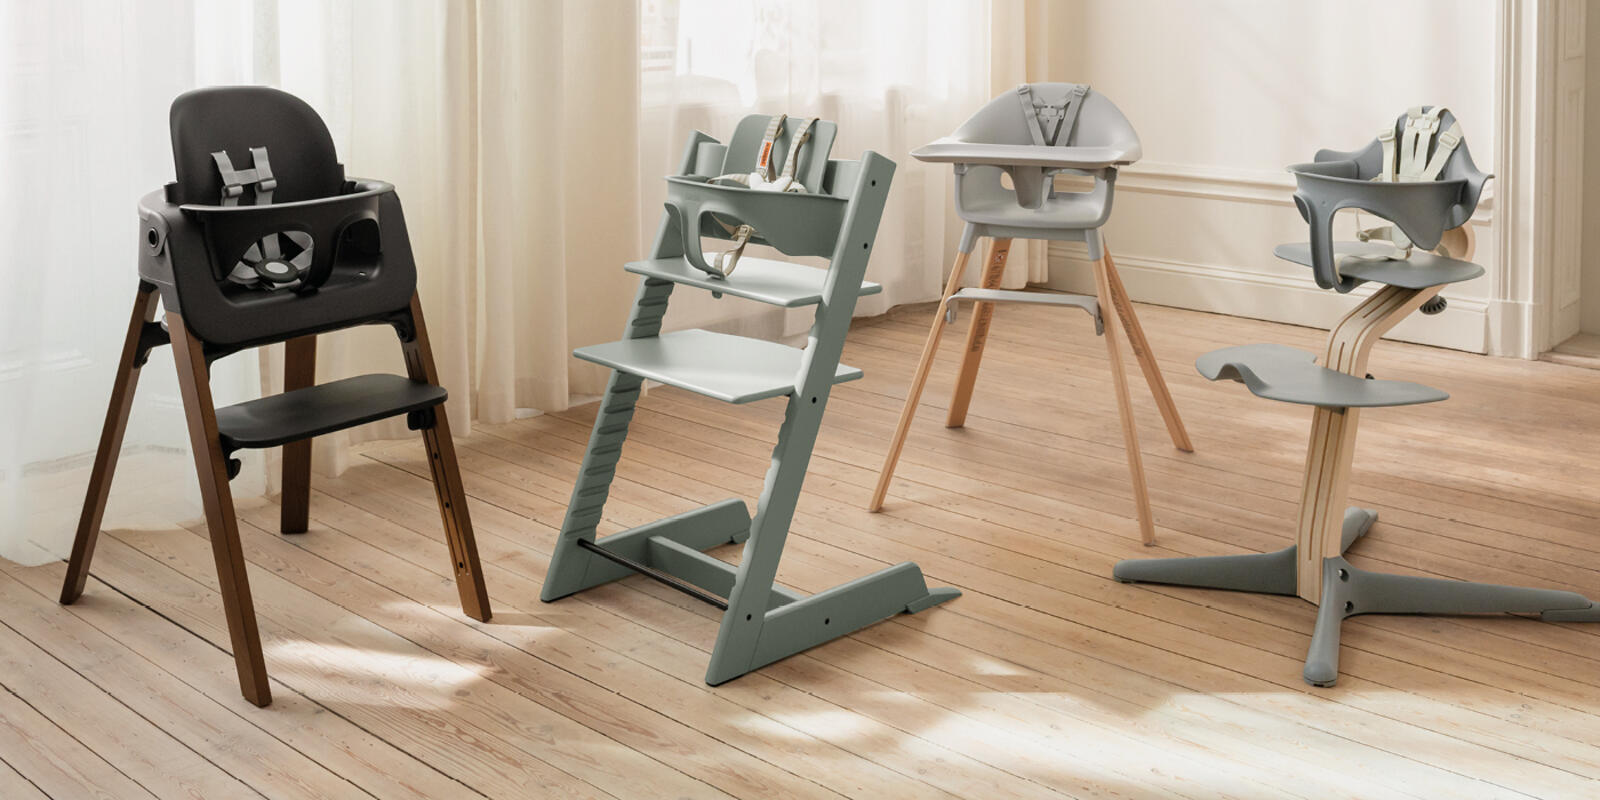 Stokke high chair assortment including steps, tripp trapp, clikk, and nomi.